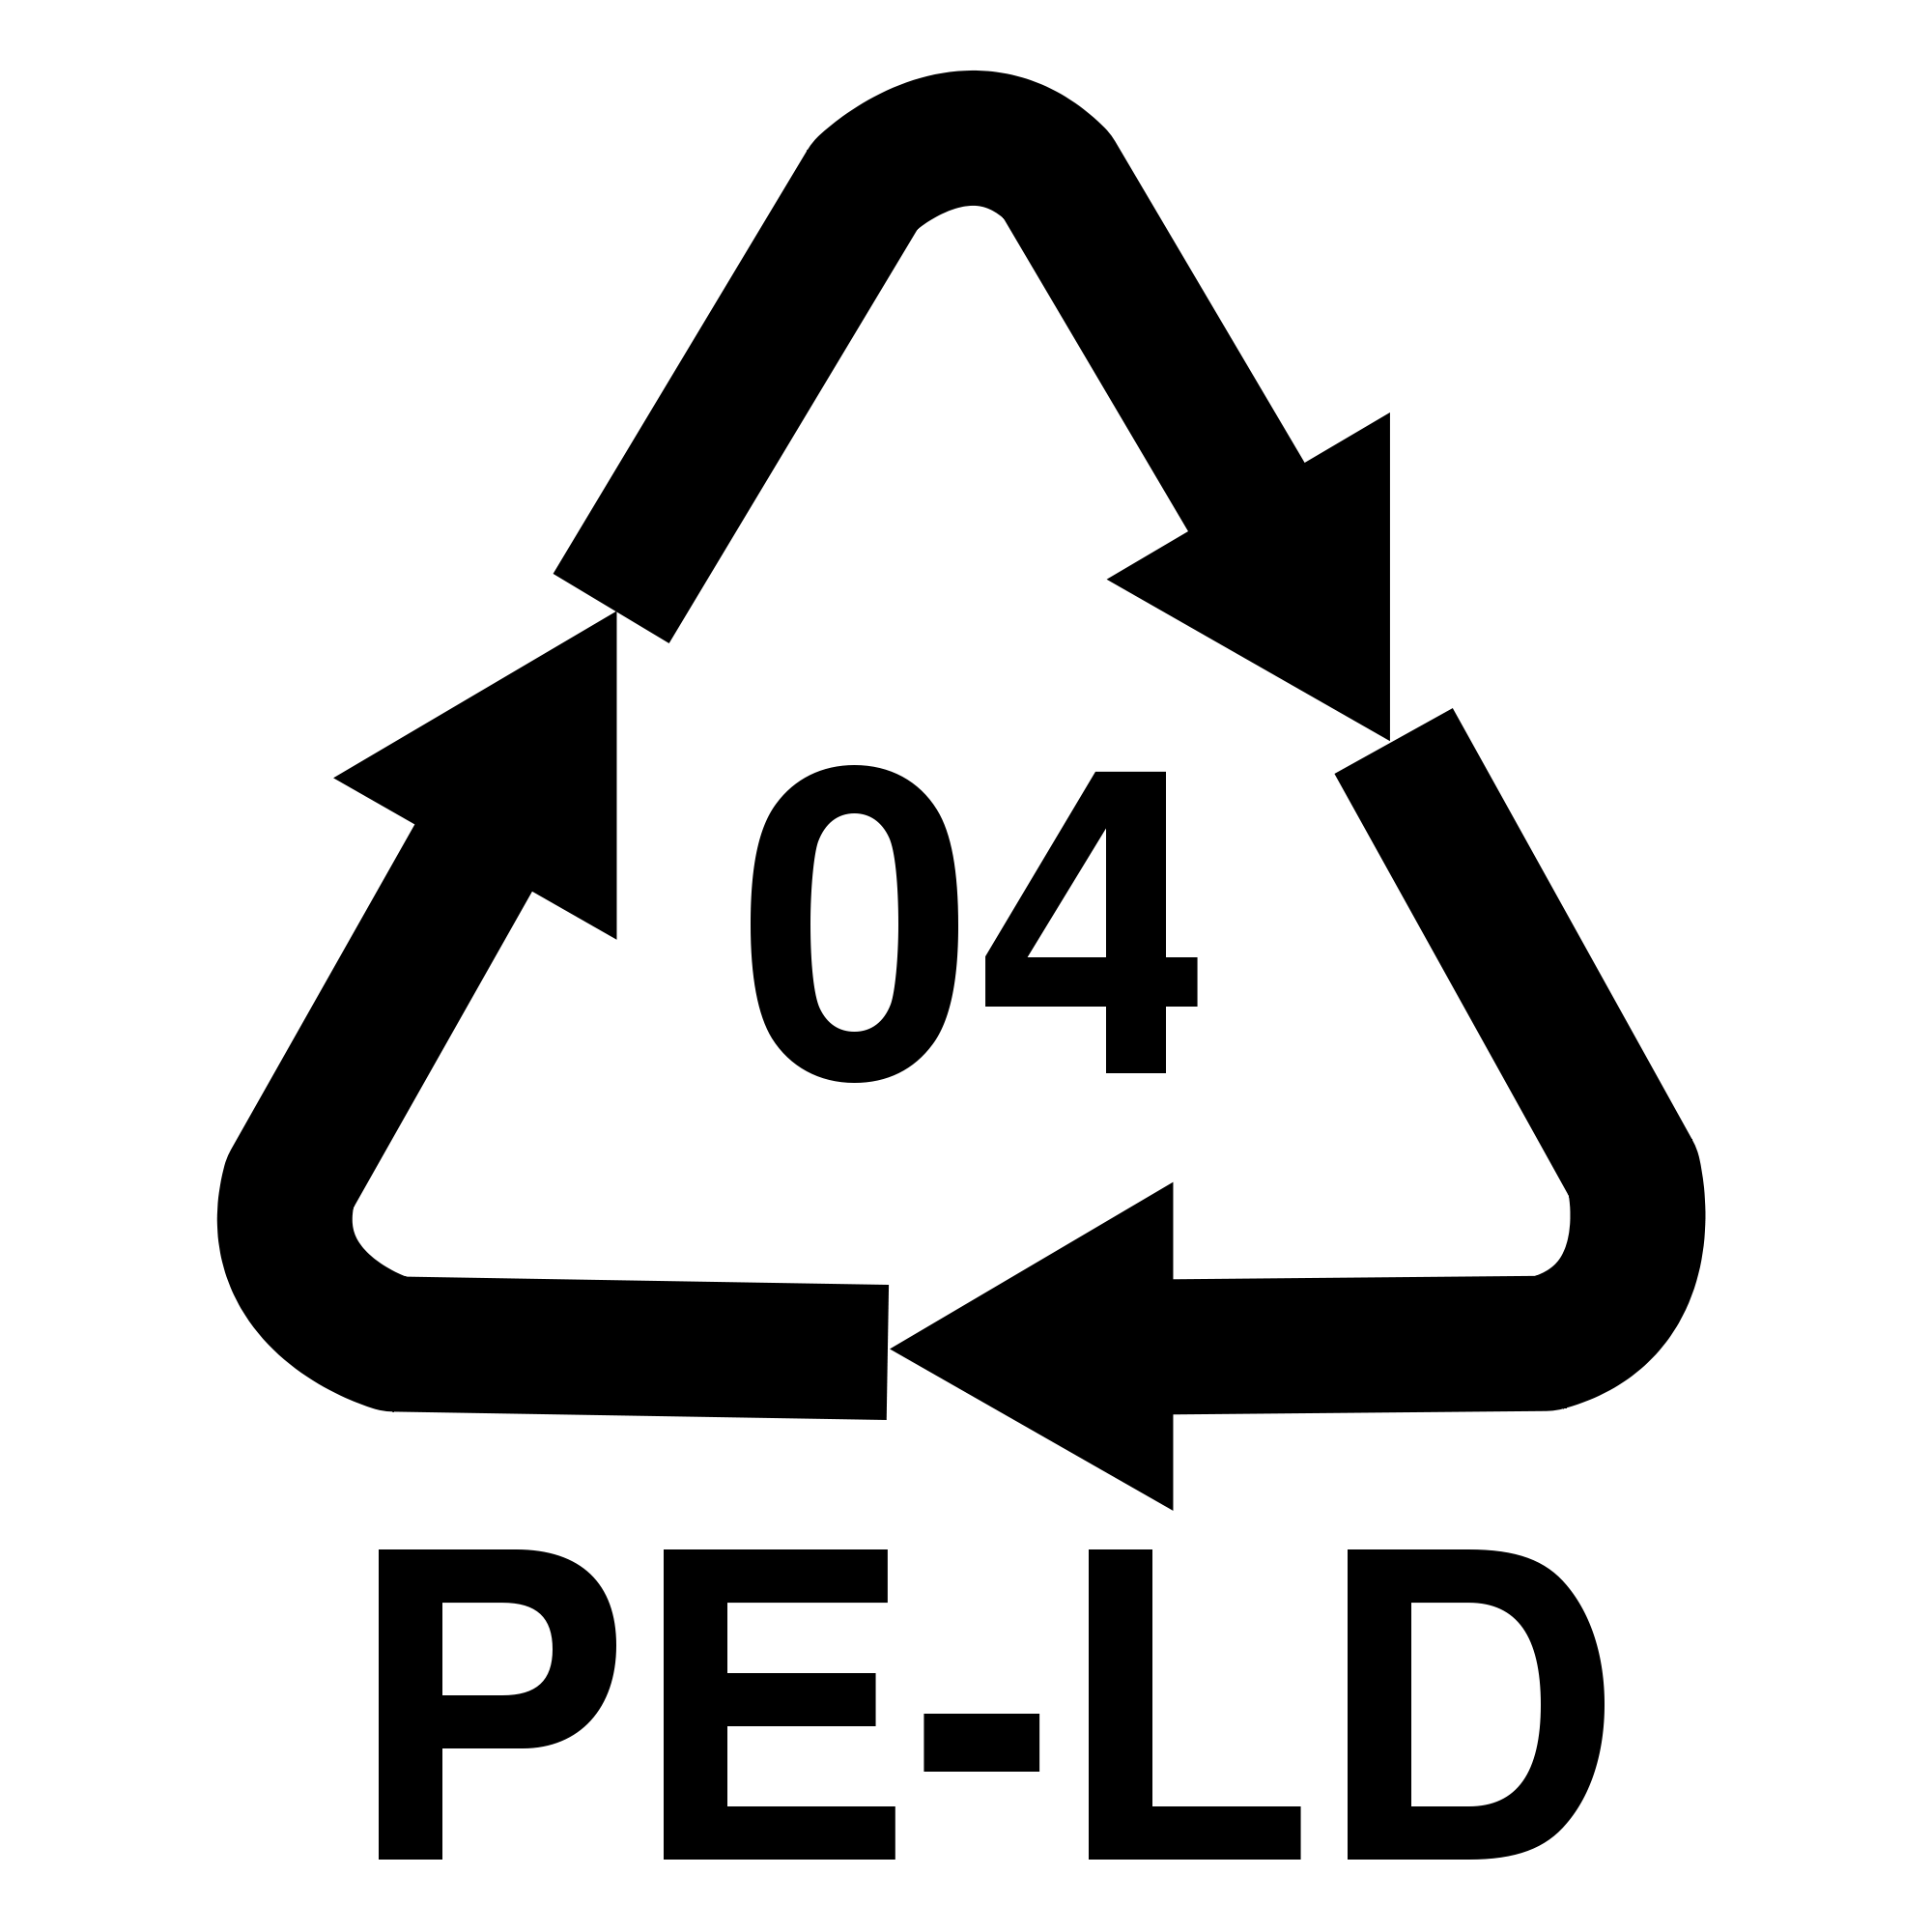 Black and White Recycle Logo - Plastic Recyc 04.svg